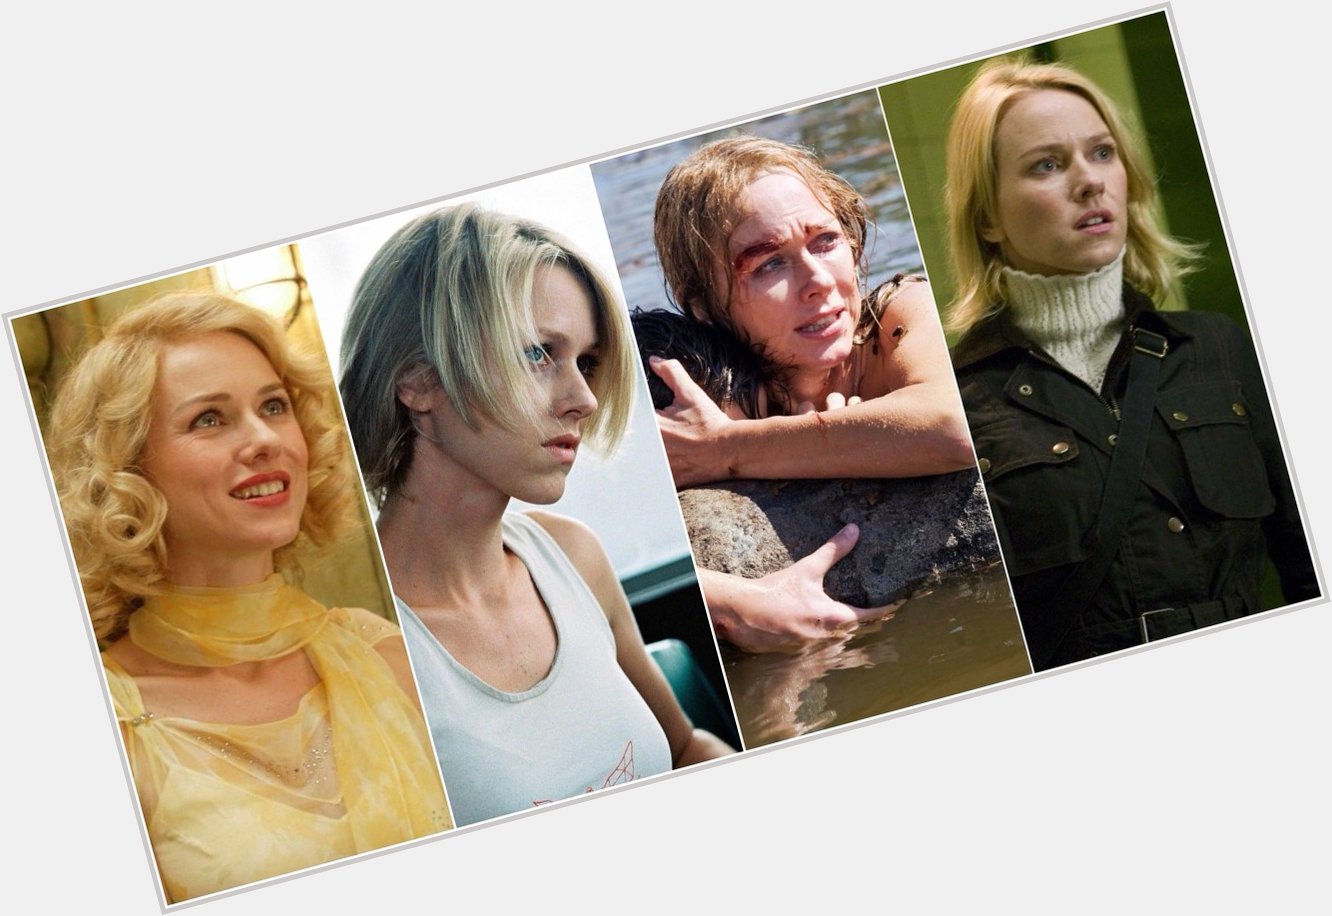 Happy 53rd birthday to the beautiful and talented Naomi Watts!

What is your favorite performance by the actress? 